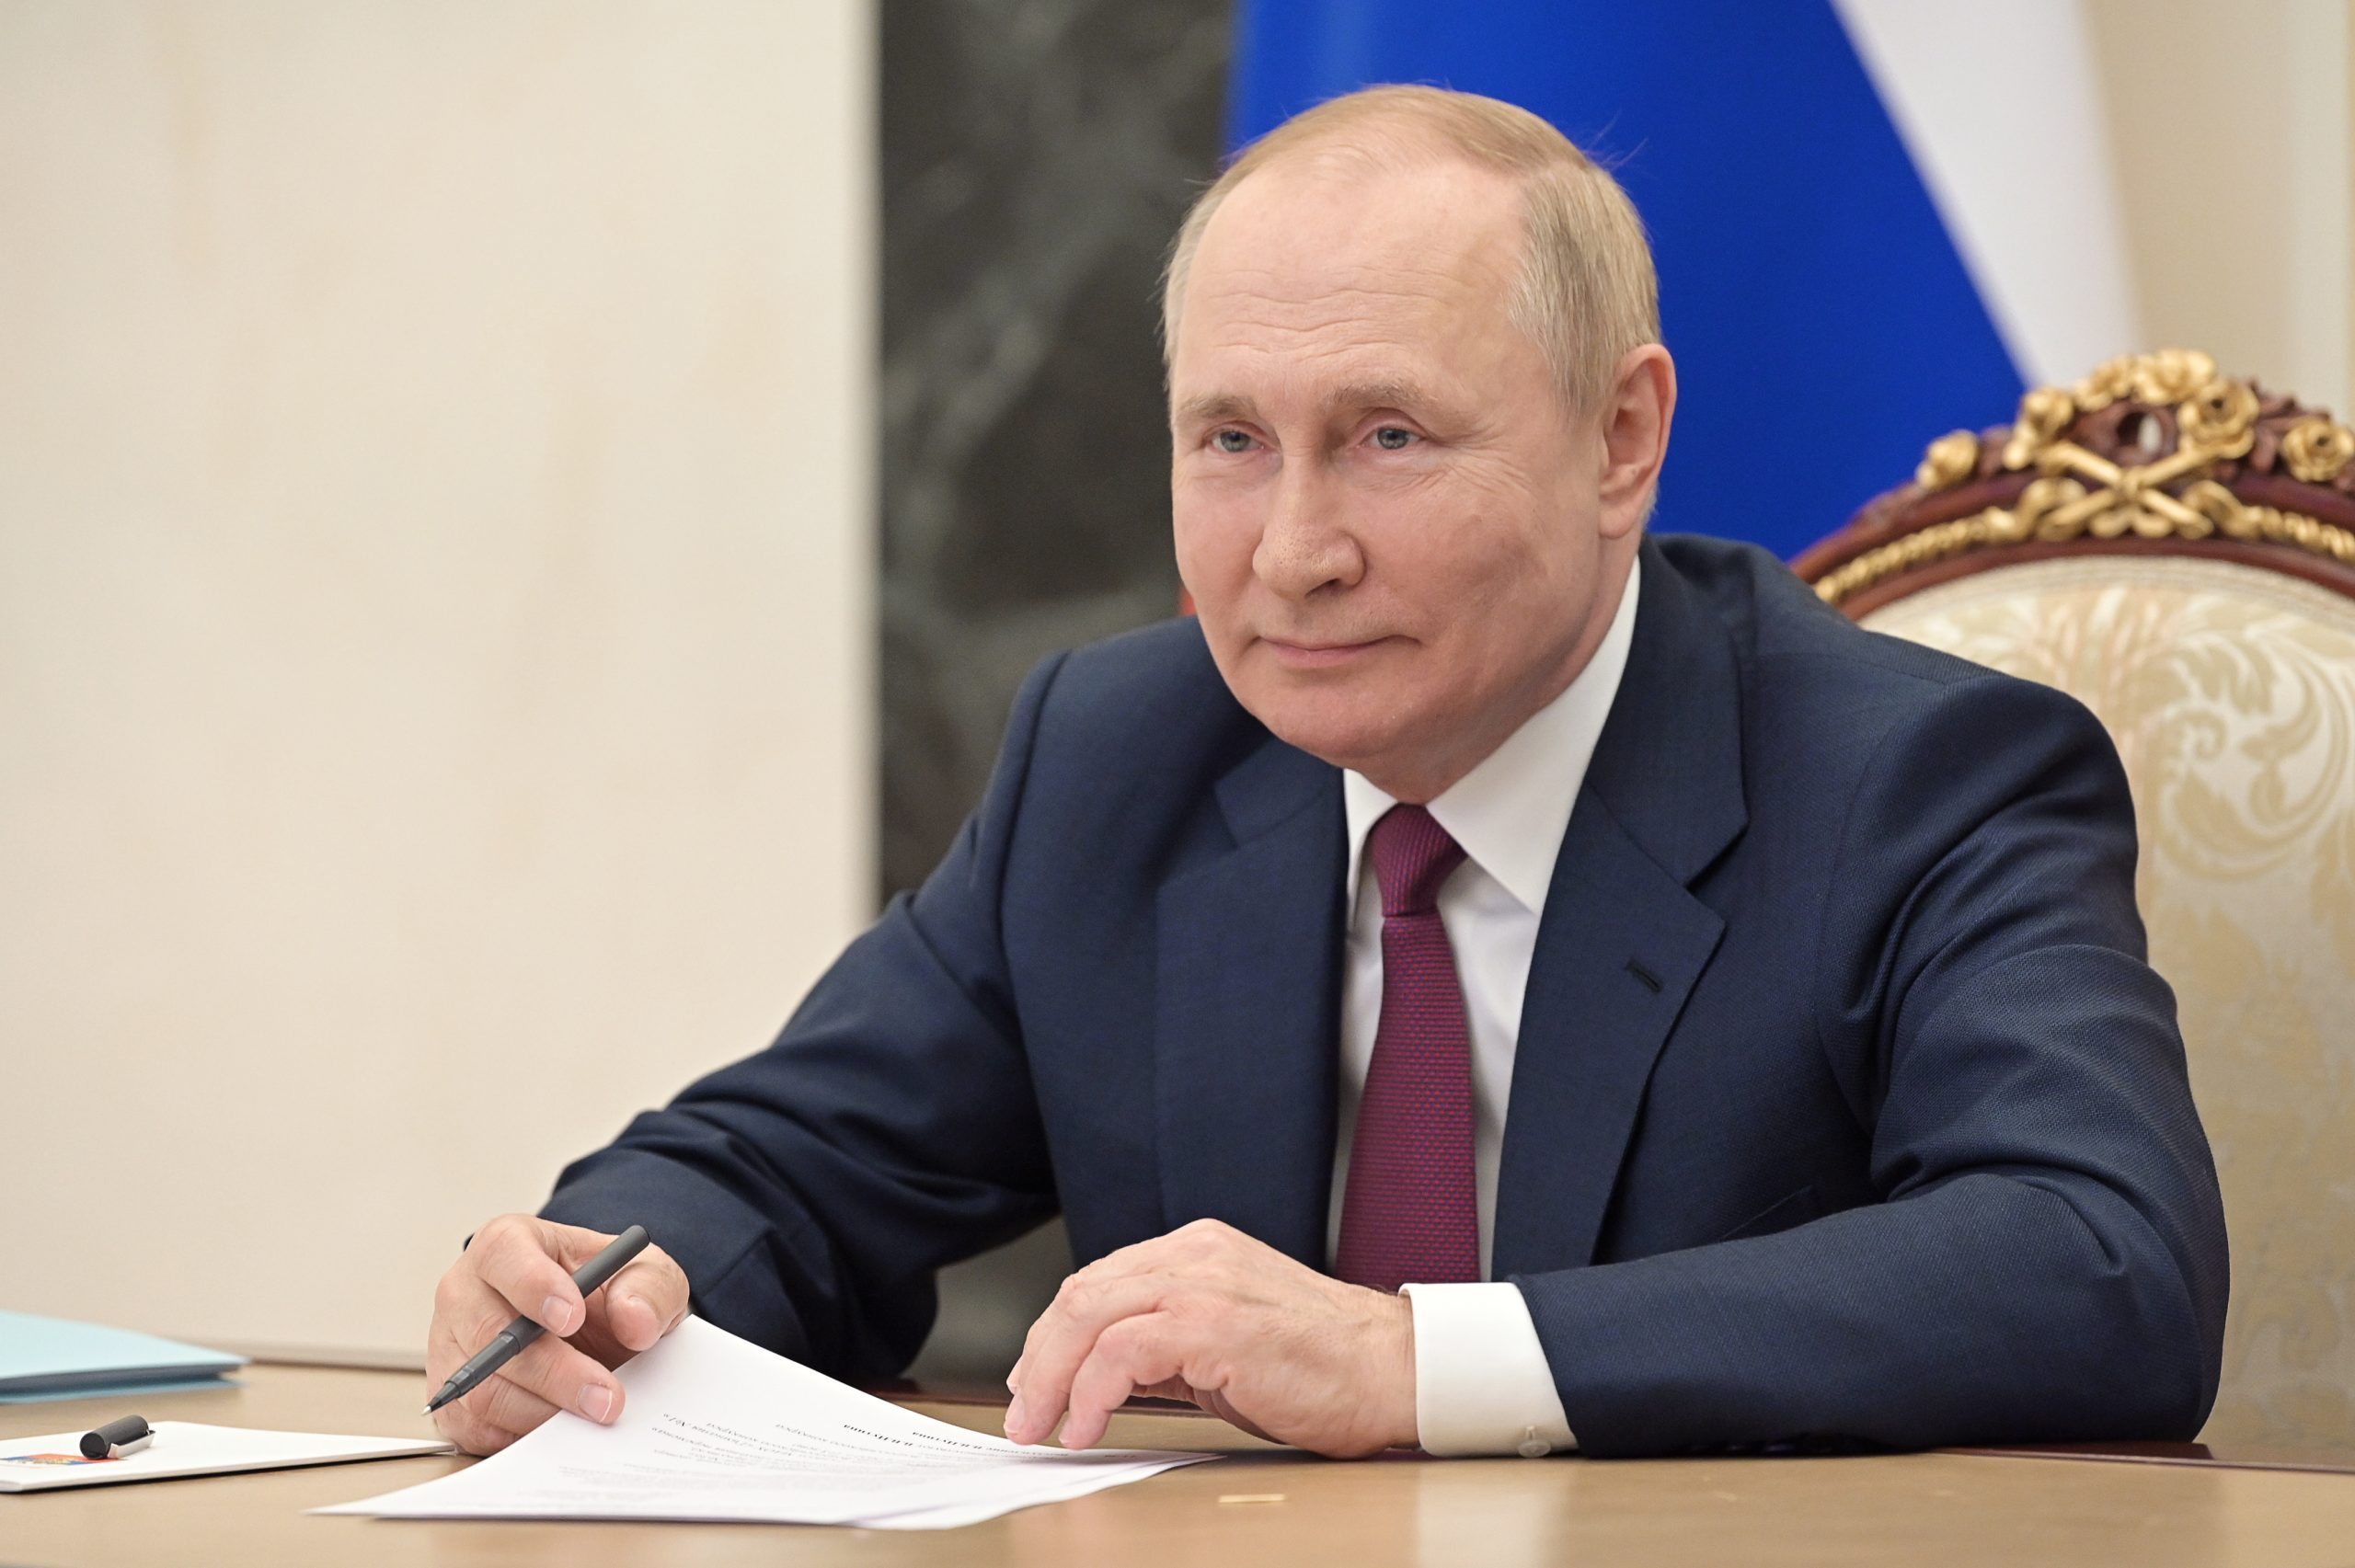 epa10081554 Russian President Vladimir Putin attends a meeting with participants of the Bolshaya Peremena national contest for school students, via teleconference call, in Moscow, Russia, 20 July 2022.  EPA/MIKHAIL KLIMENTYEV/KREMLIN POOL/SPUTNIK / POOL MANDATORY CREDIT